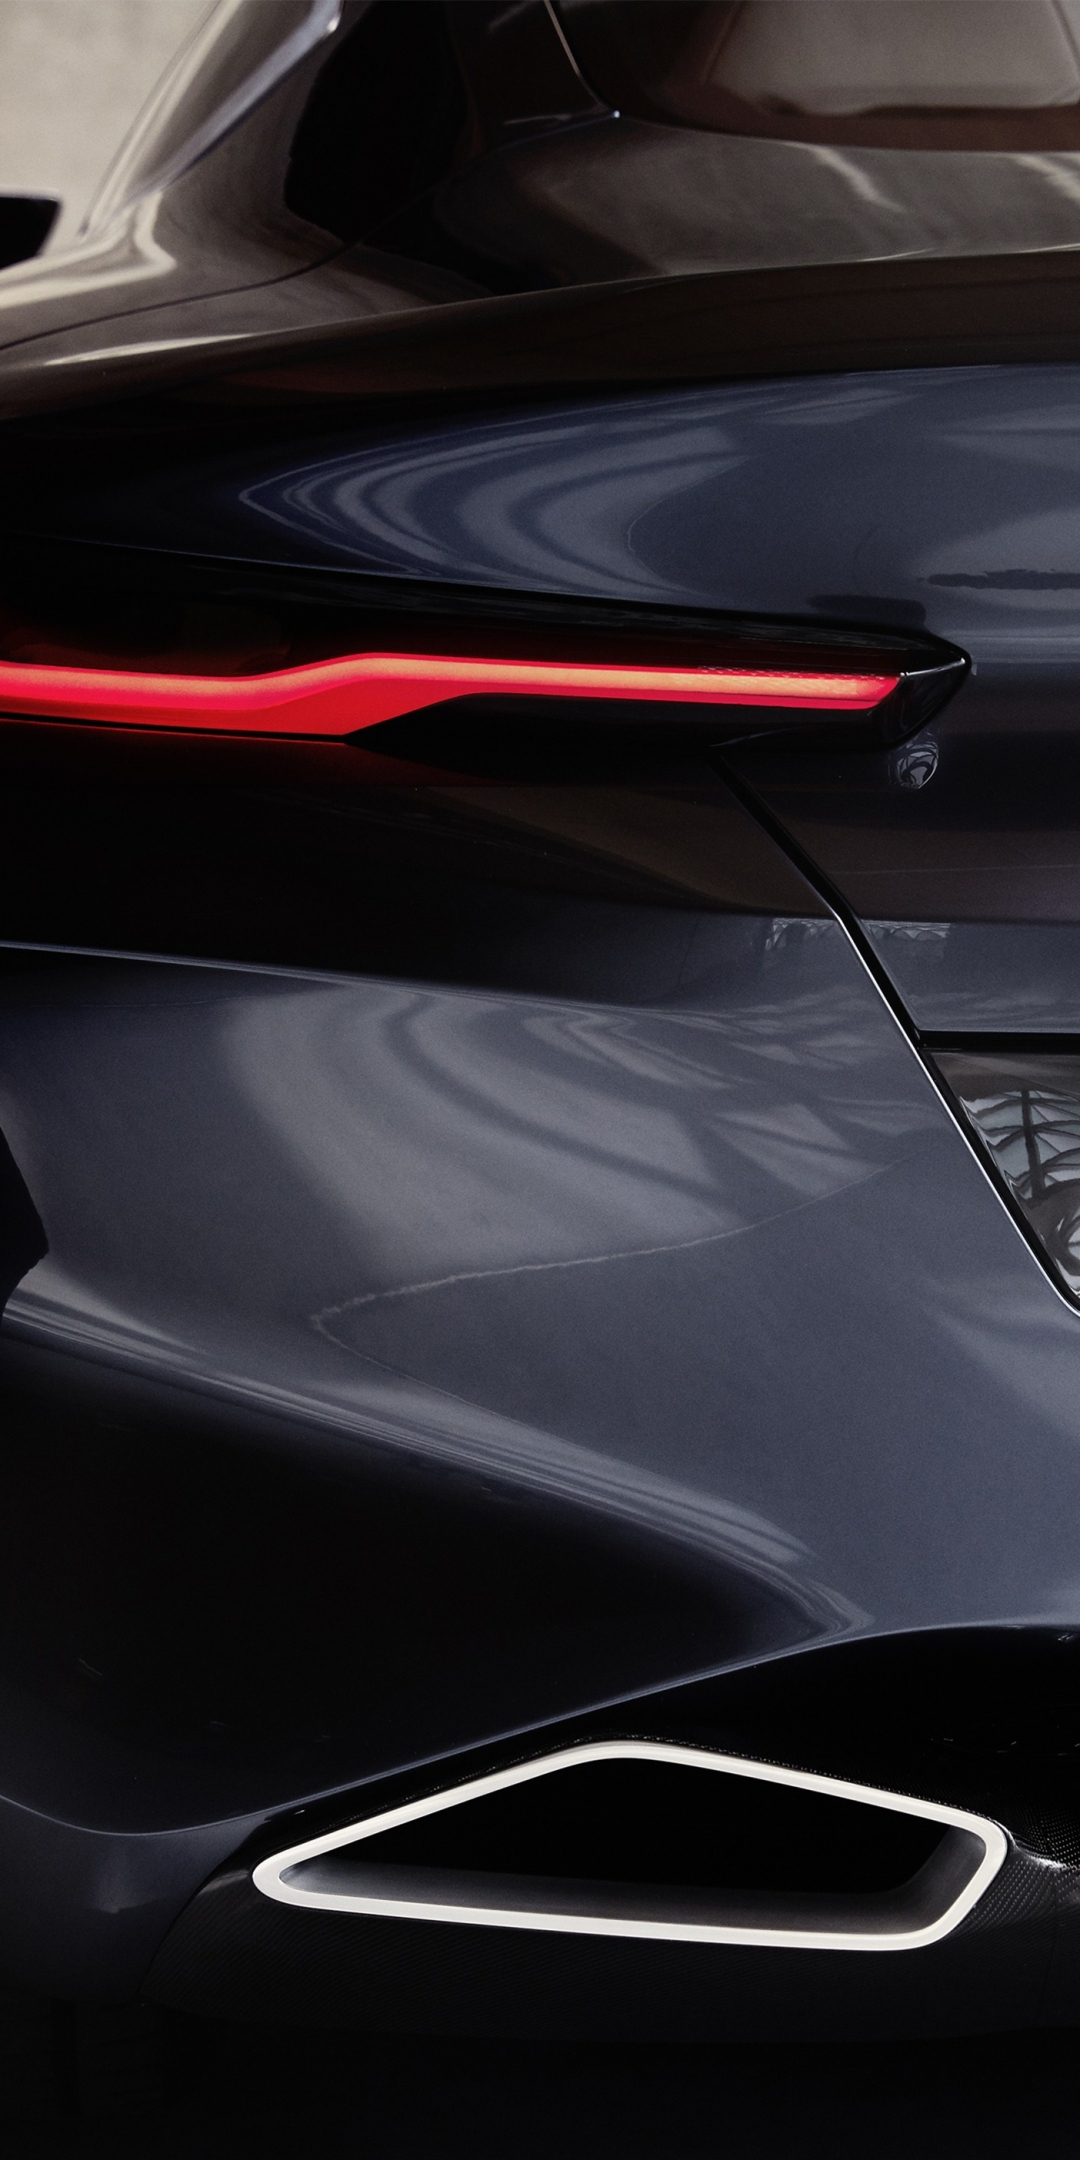 2018, BMW concept 8 series, taillight, 1080x2160 wallpaper